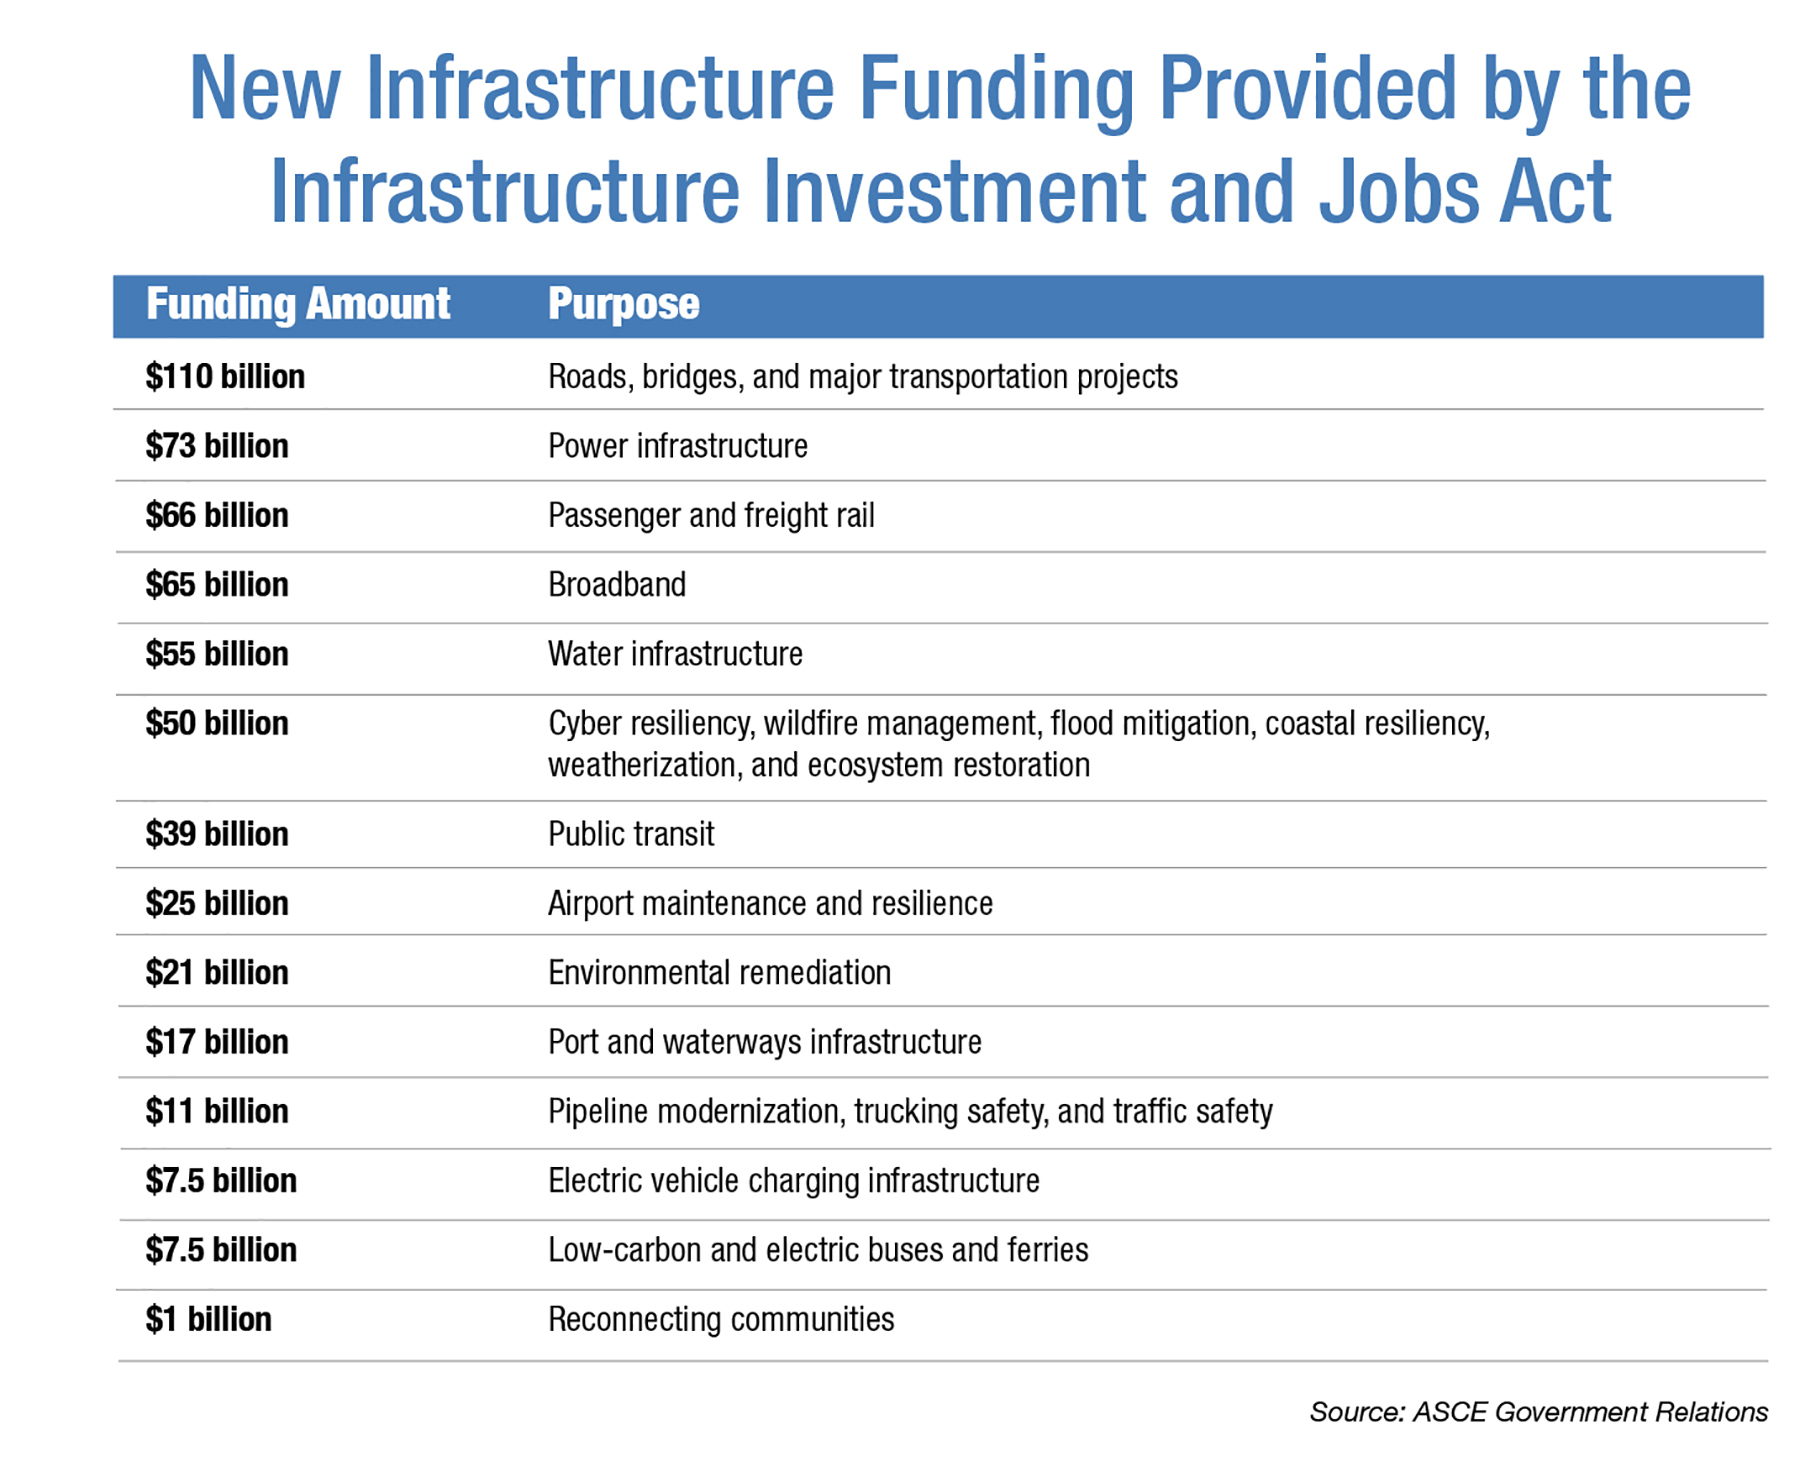 chart showing how many billions were allocated to various categories of infrastructure in the infrastructure investment and jobs act of 2021. For example, roads, bridges, and major transportation projects were awarded $110 billion.